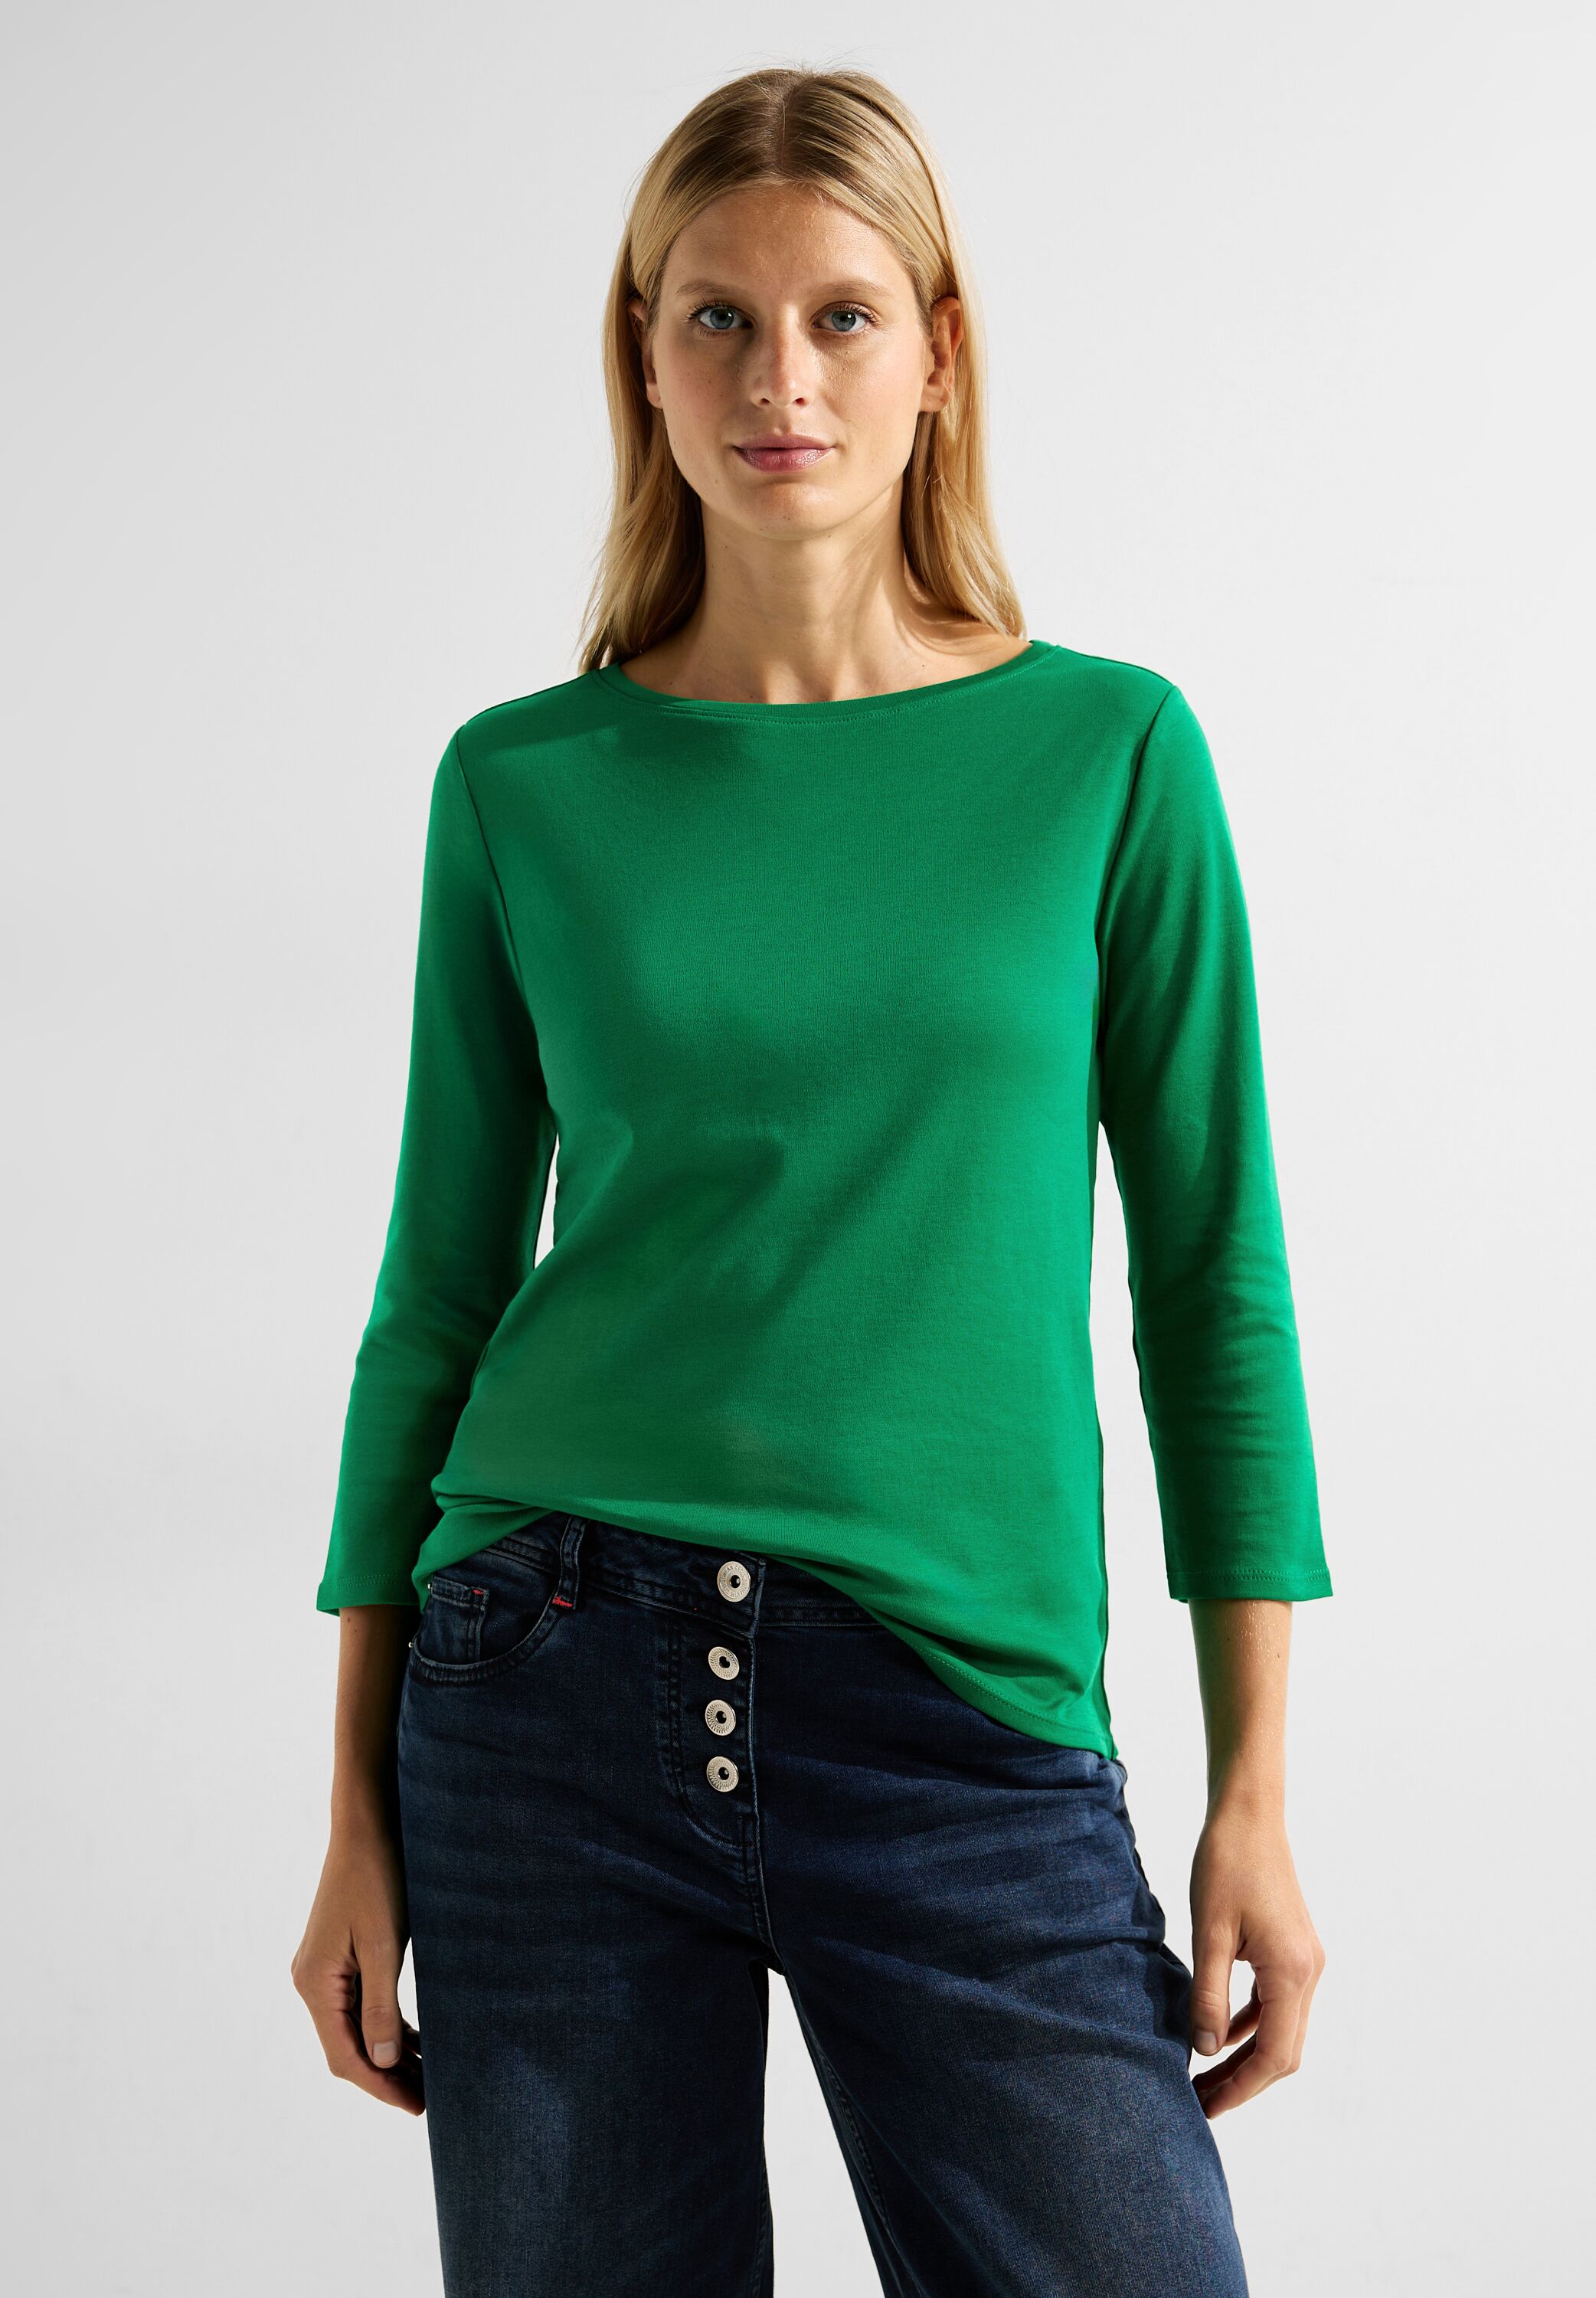 CECIL Shirt in Easy B317389-15069 - Green Mode CONCEPT